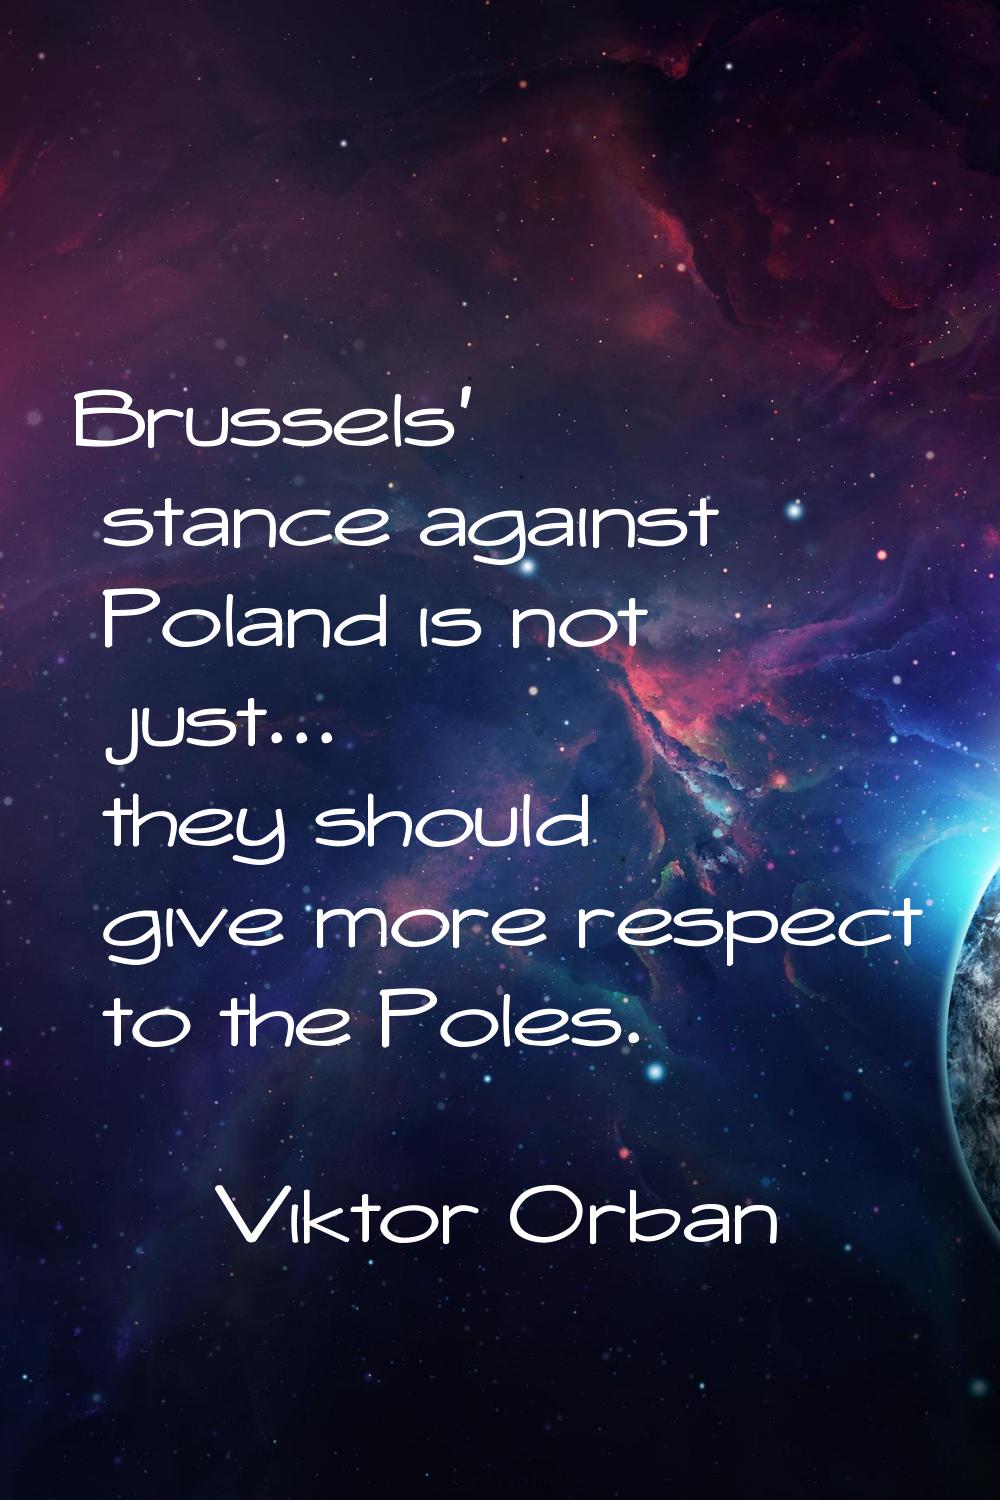 Brussels' stance against Poland is not just... they should give more respect to the Poles.